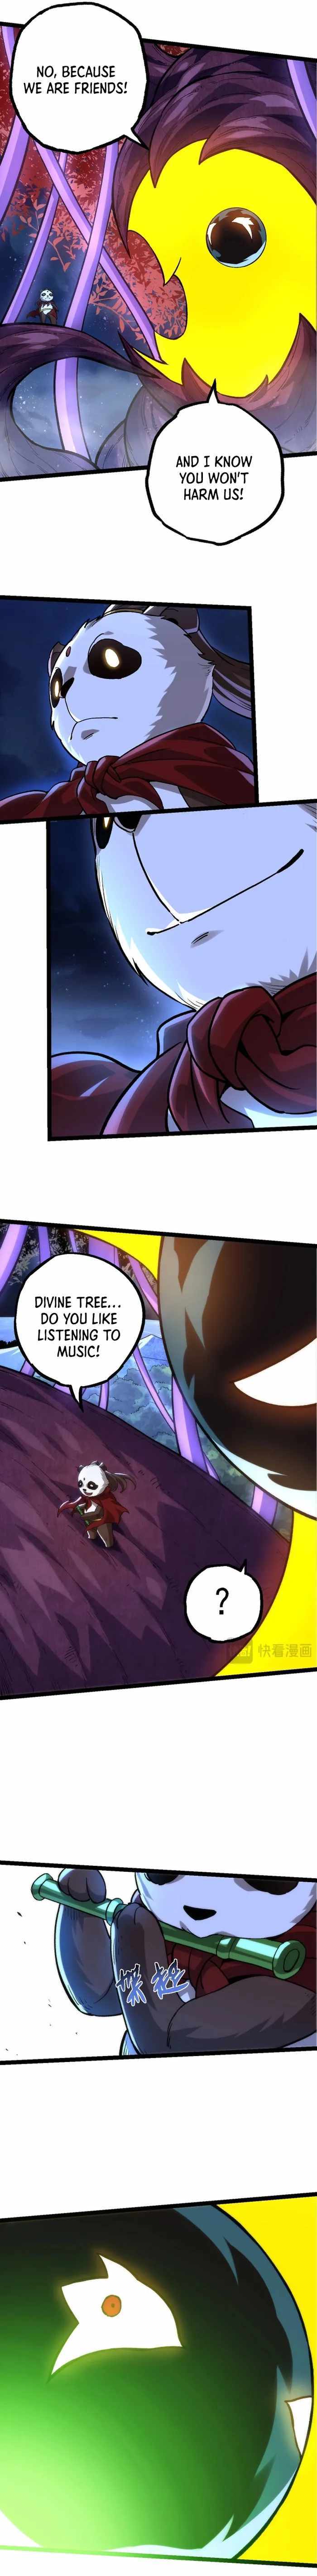 Evolution Begins With A Big Tree - Page 3